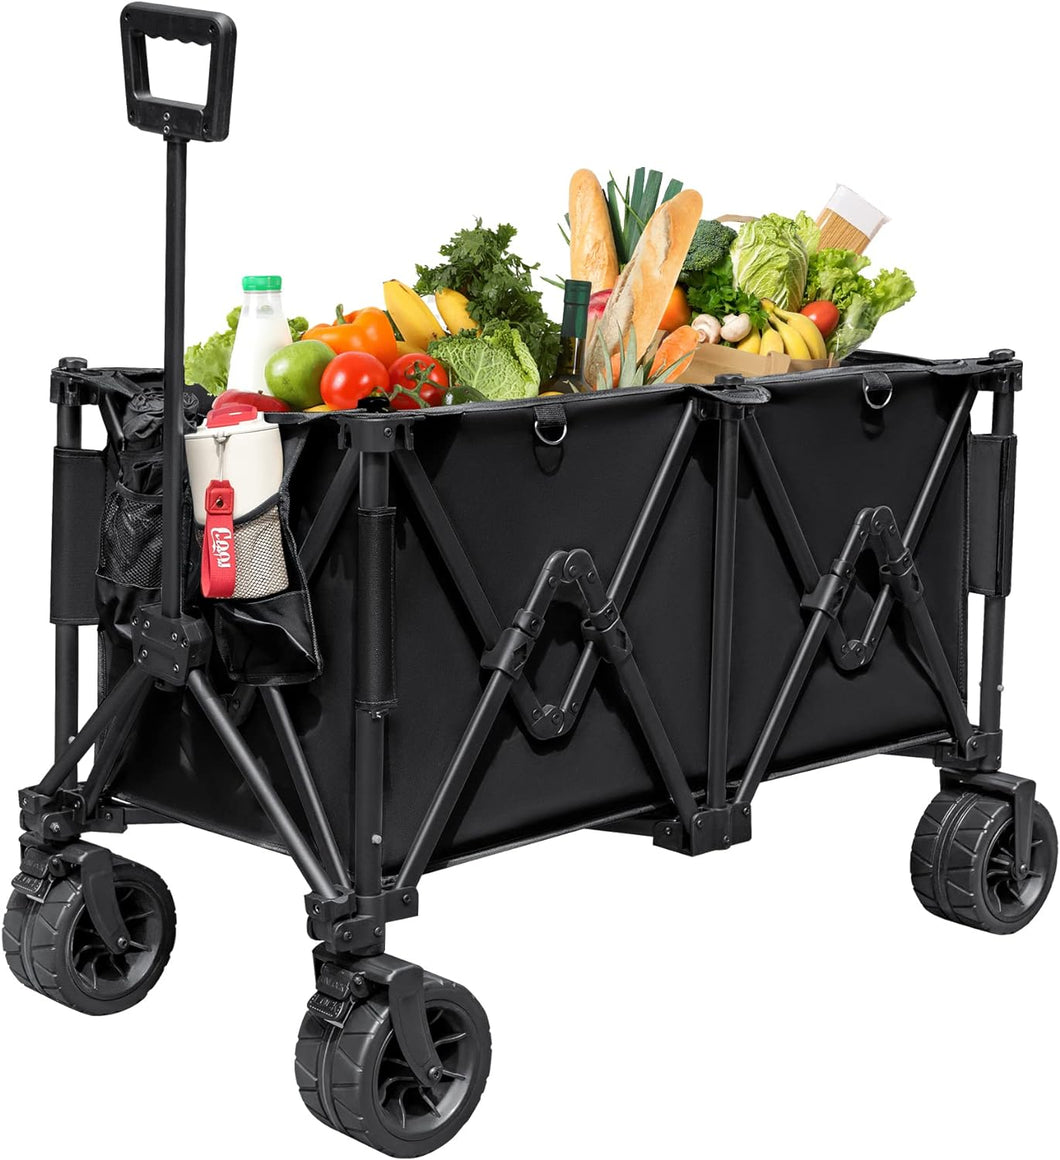 Collapsible Foldable Wagon with 300lbs Weight Capacity, Heavy Duty Utility Garden Cart for Beach, Sports, Shopping, Camping with Big All-Terrain Wheels & Cover Bag（Black）